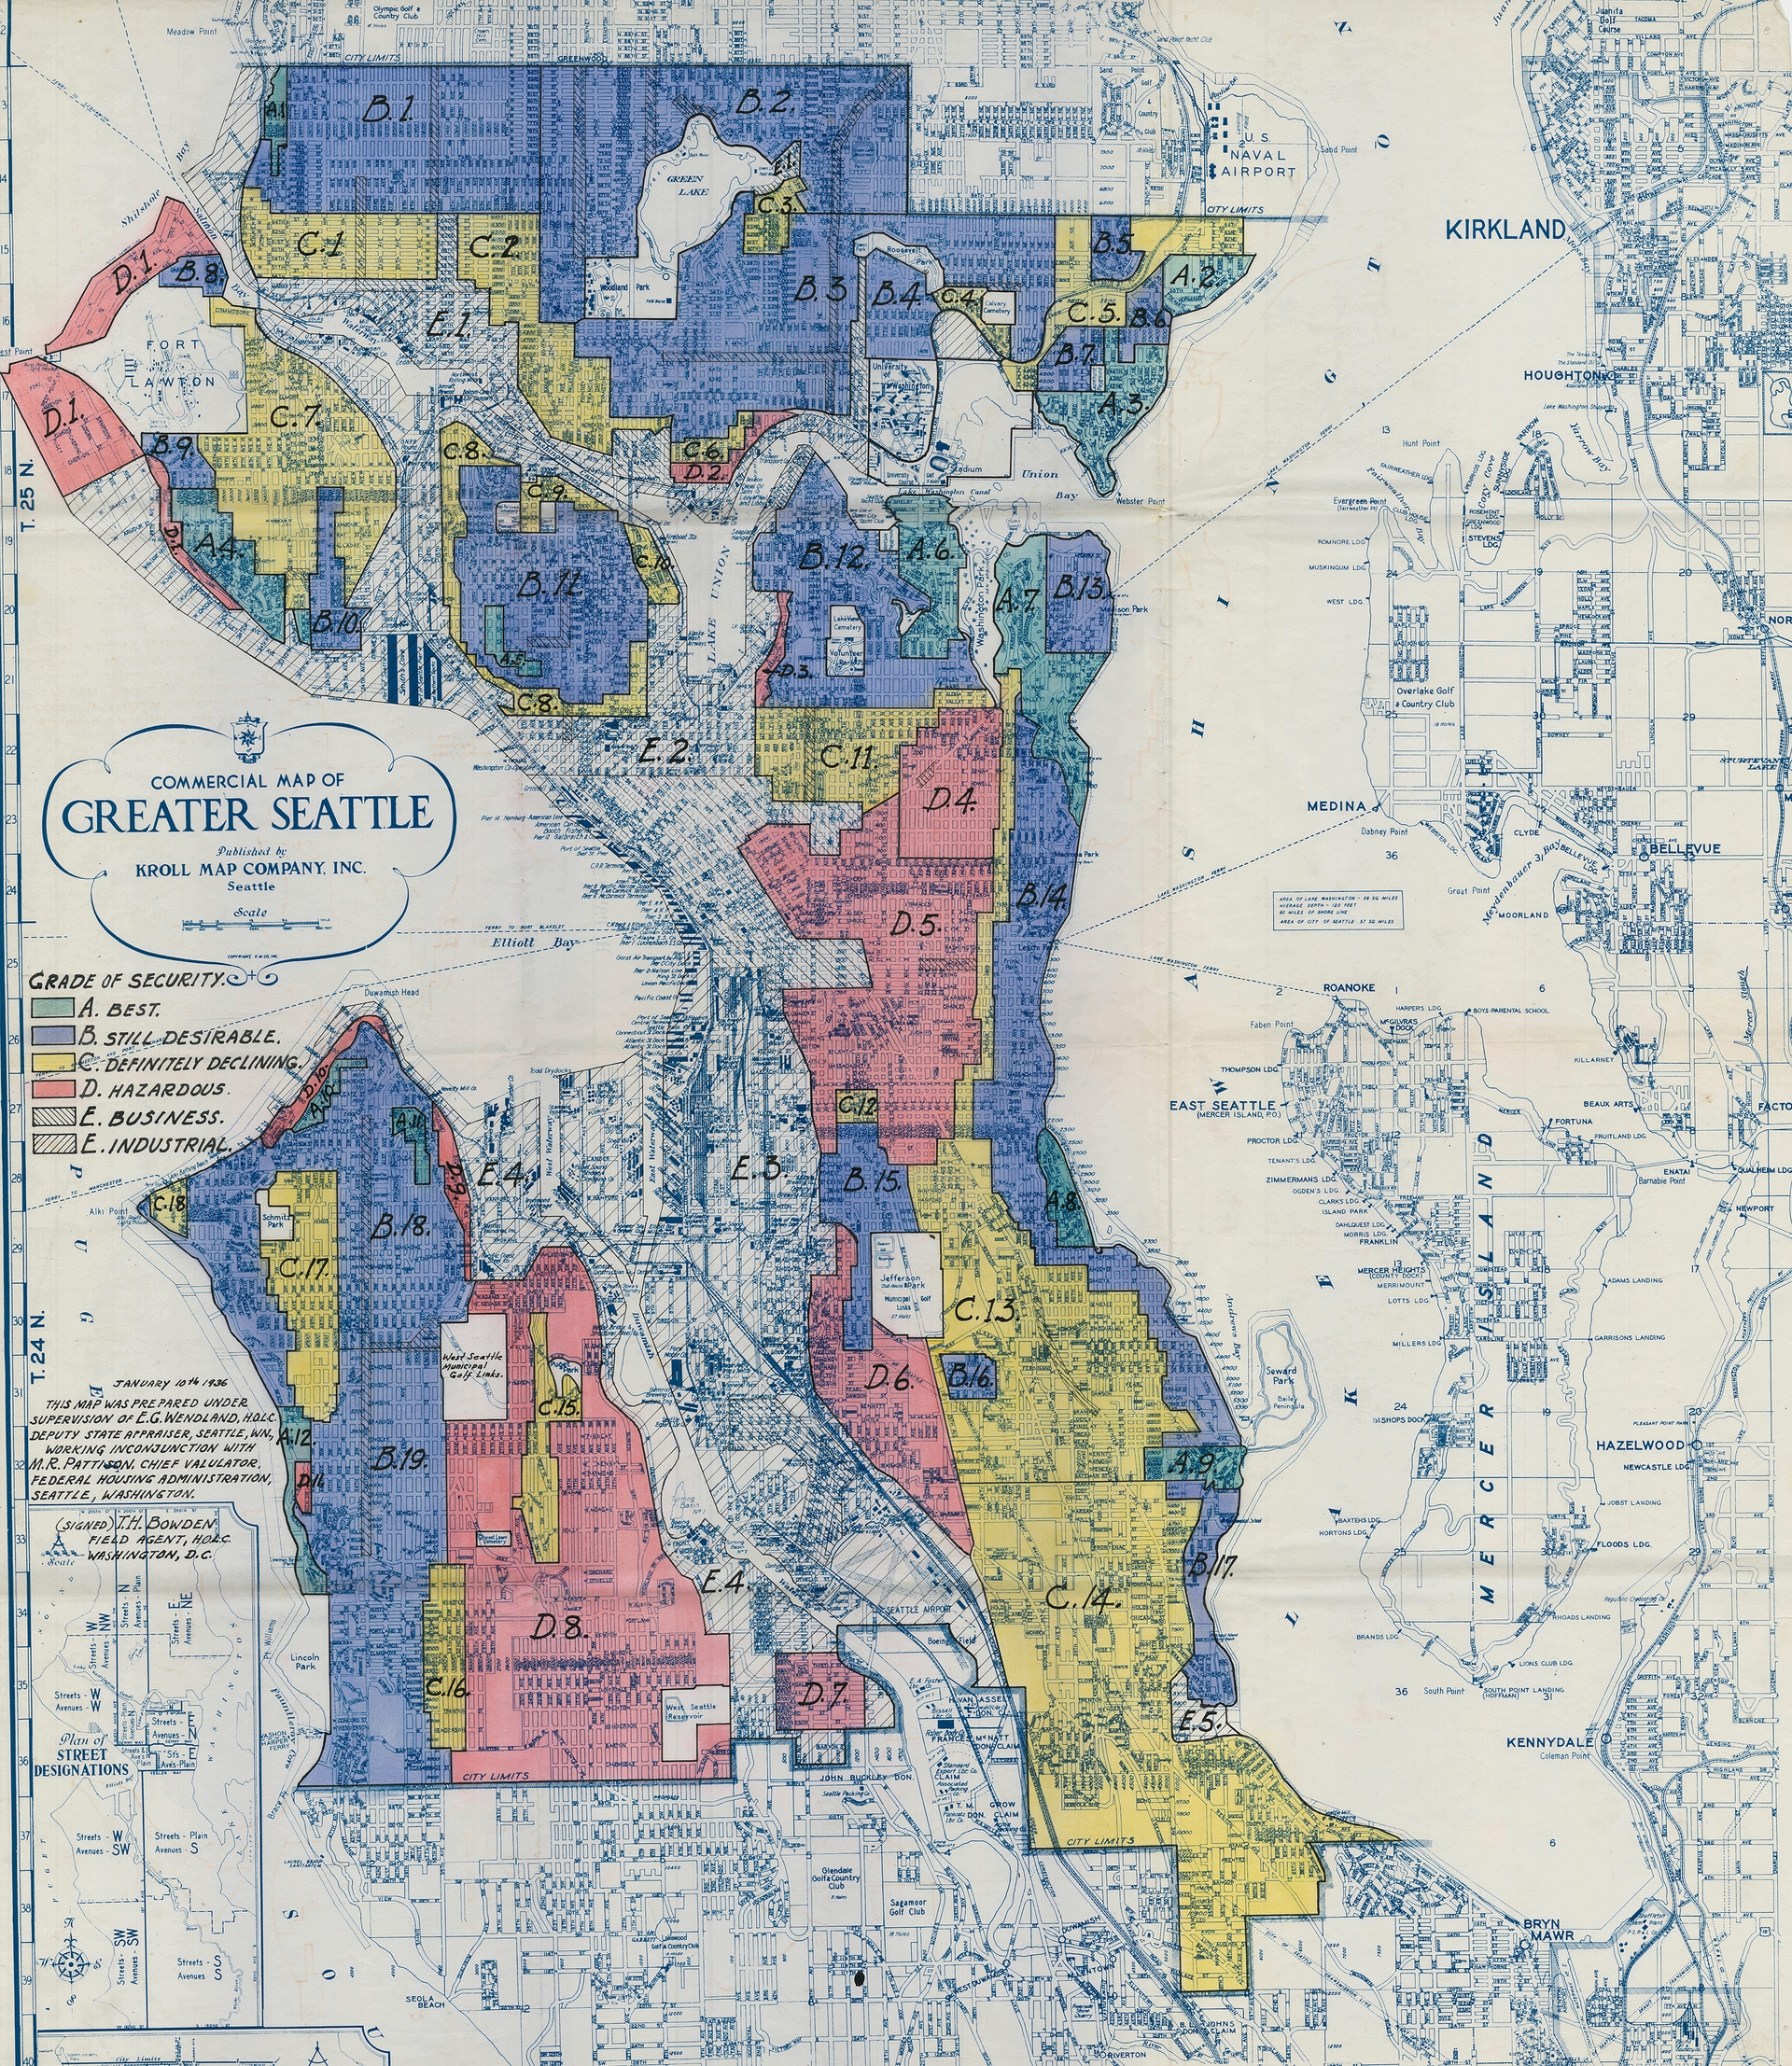 A Home Owners' Loan Corporation (HOLC) map of Seattle, WA.